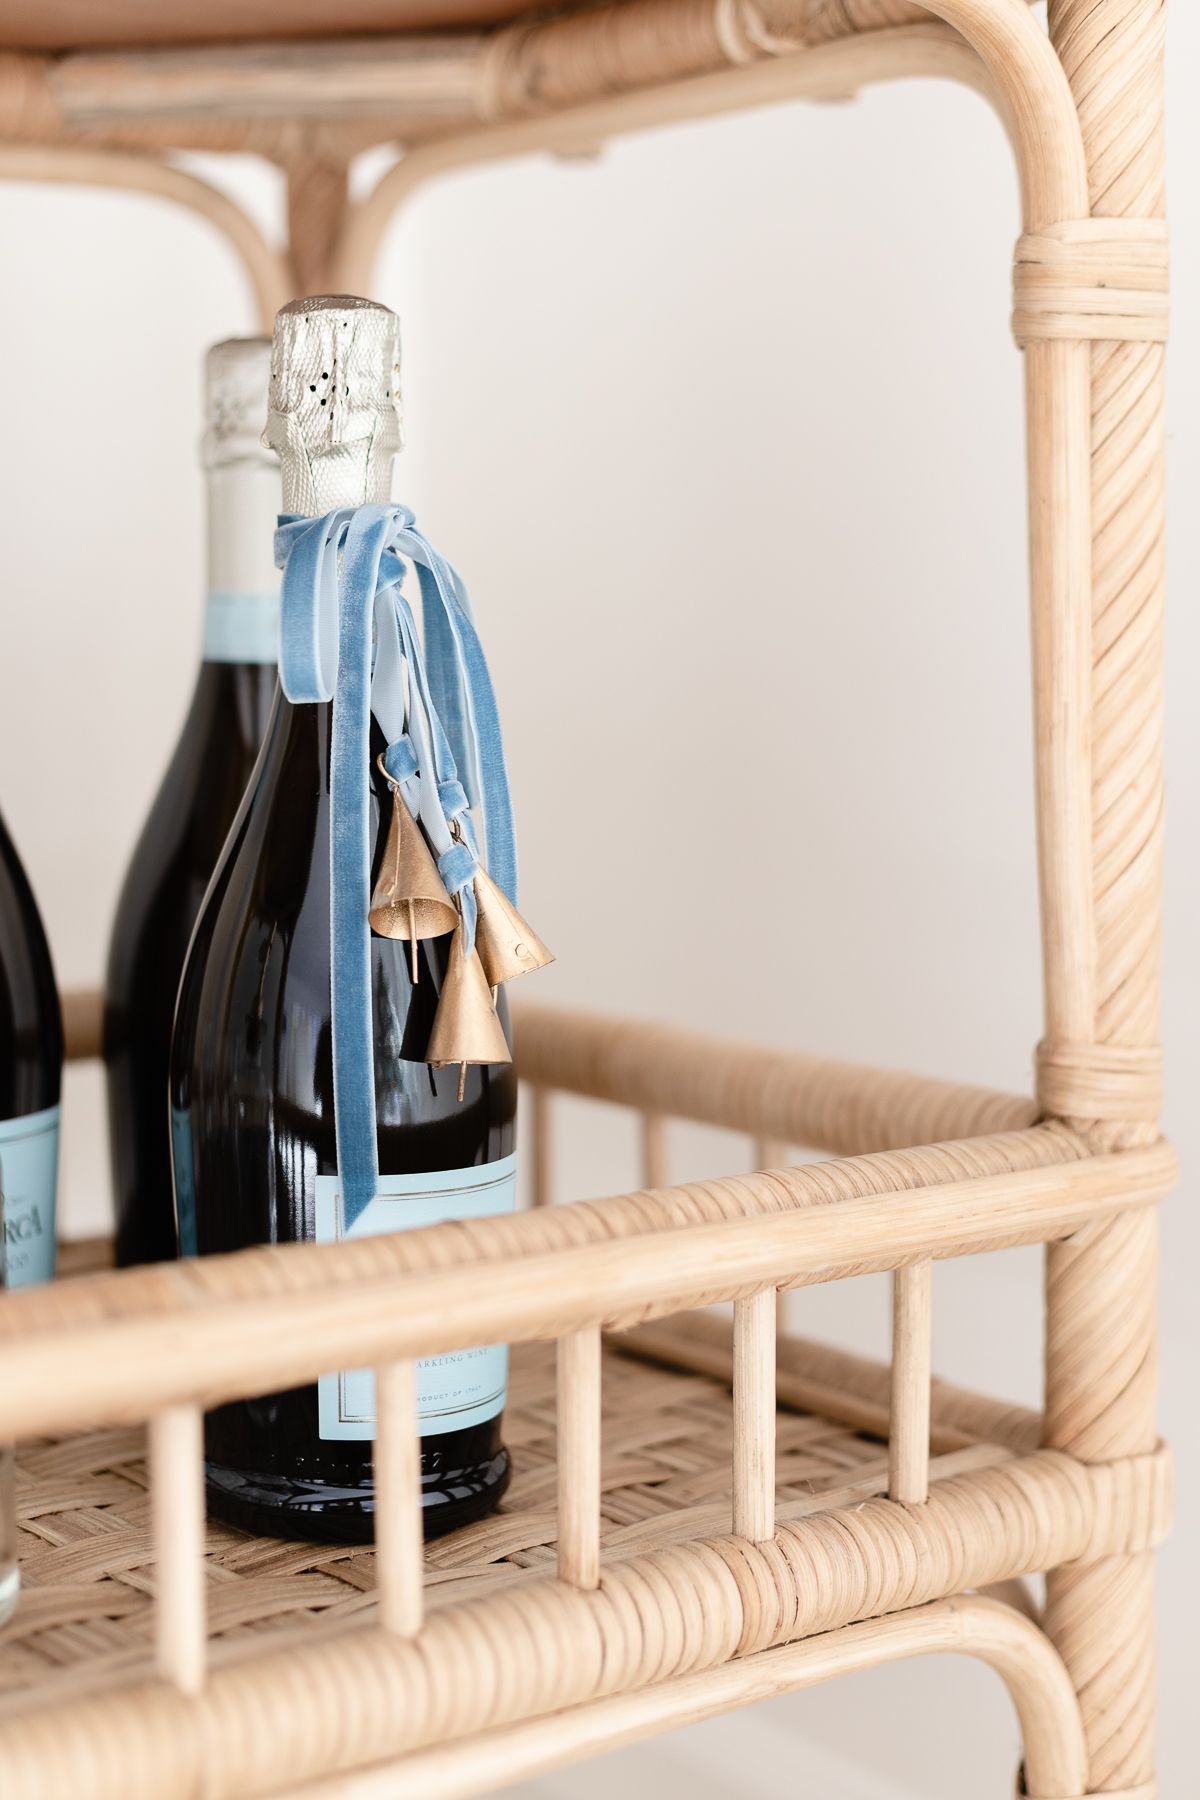 A bottle of champagne tied with a velvet bow and brass bells on a rattan bar cart.